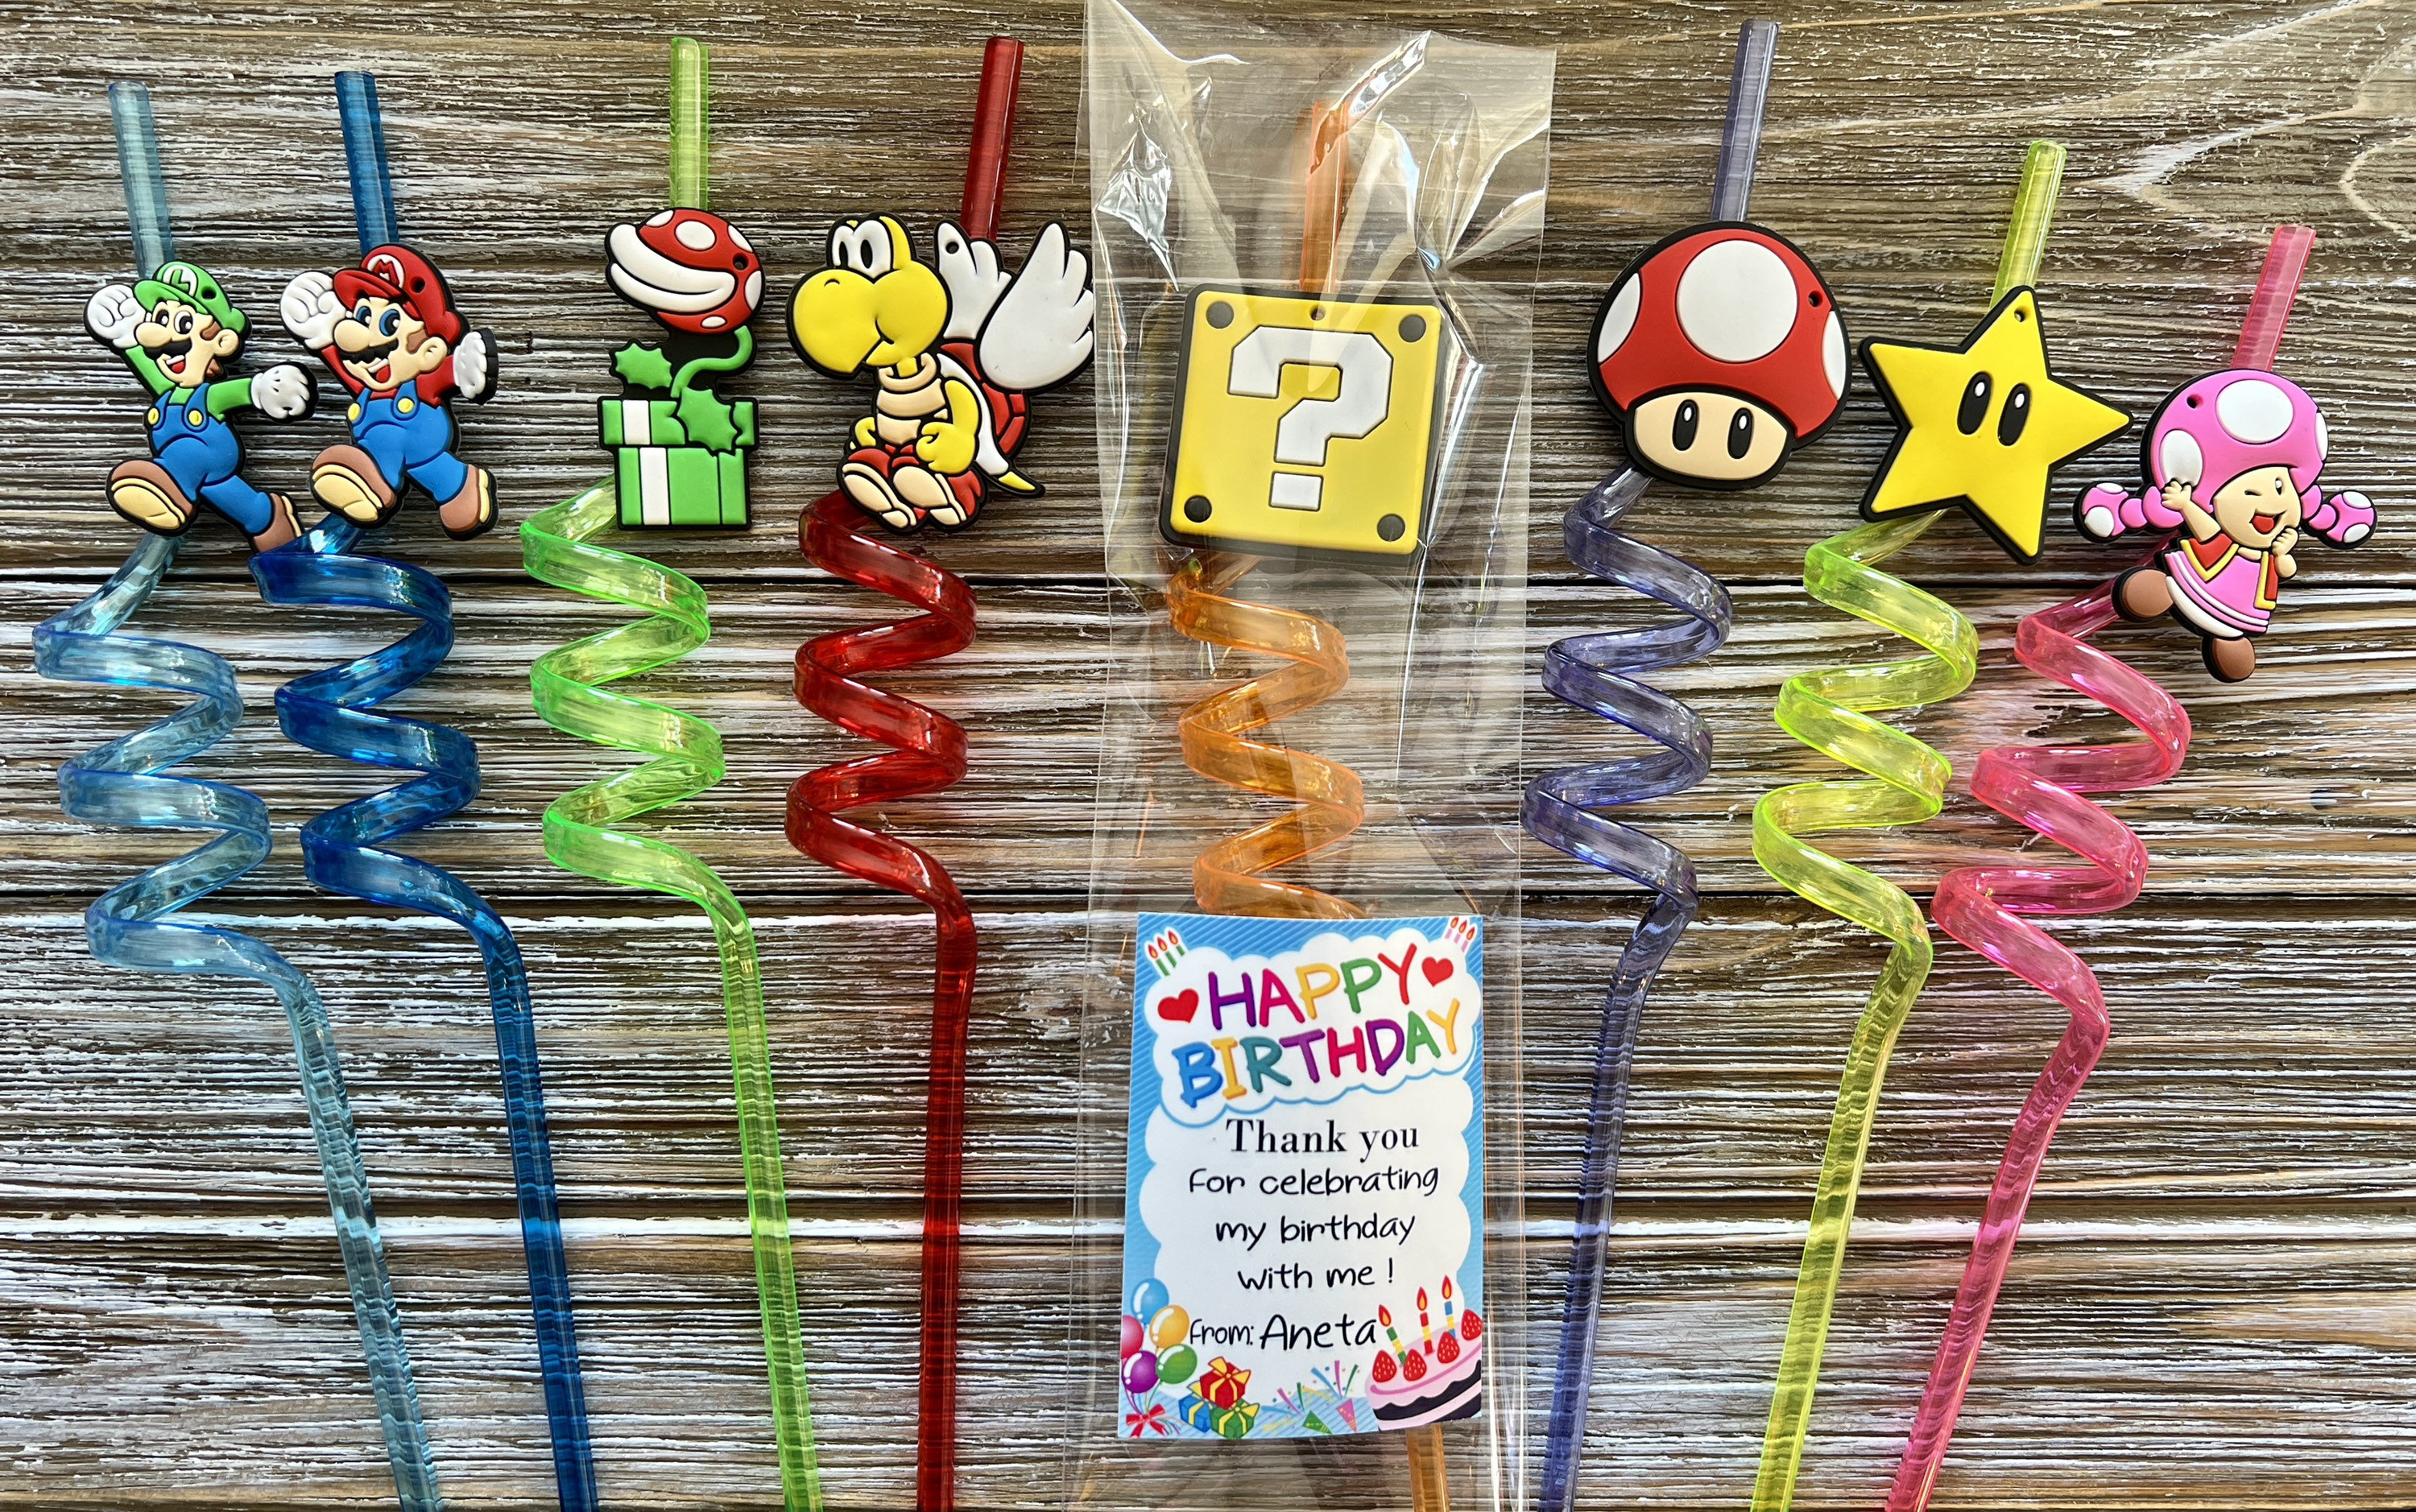 24 PCS Super Bros Straws Anime Themed Mario Straws with 2 Cleaning Brush 8  Shapes Designs for Super Bros Mario Themed Birthday Party Favors Supplies 8